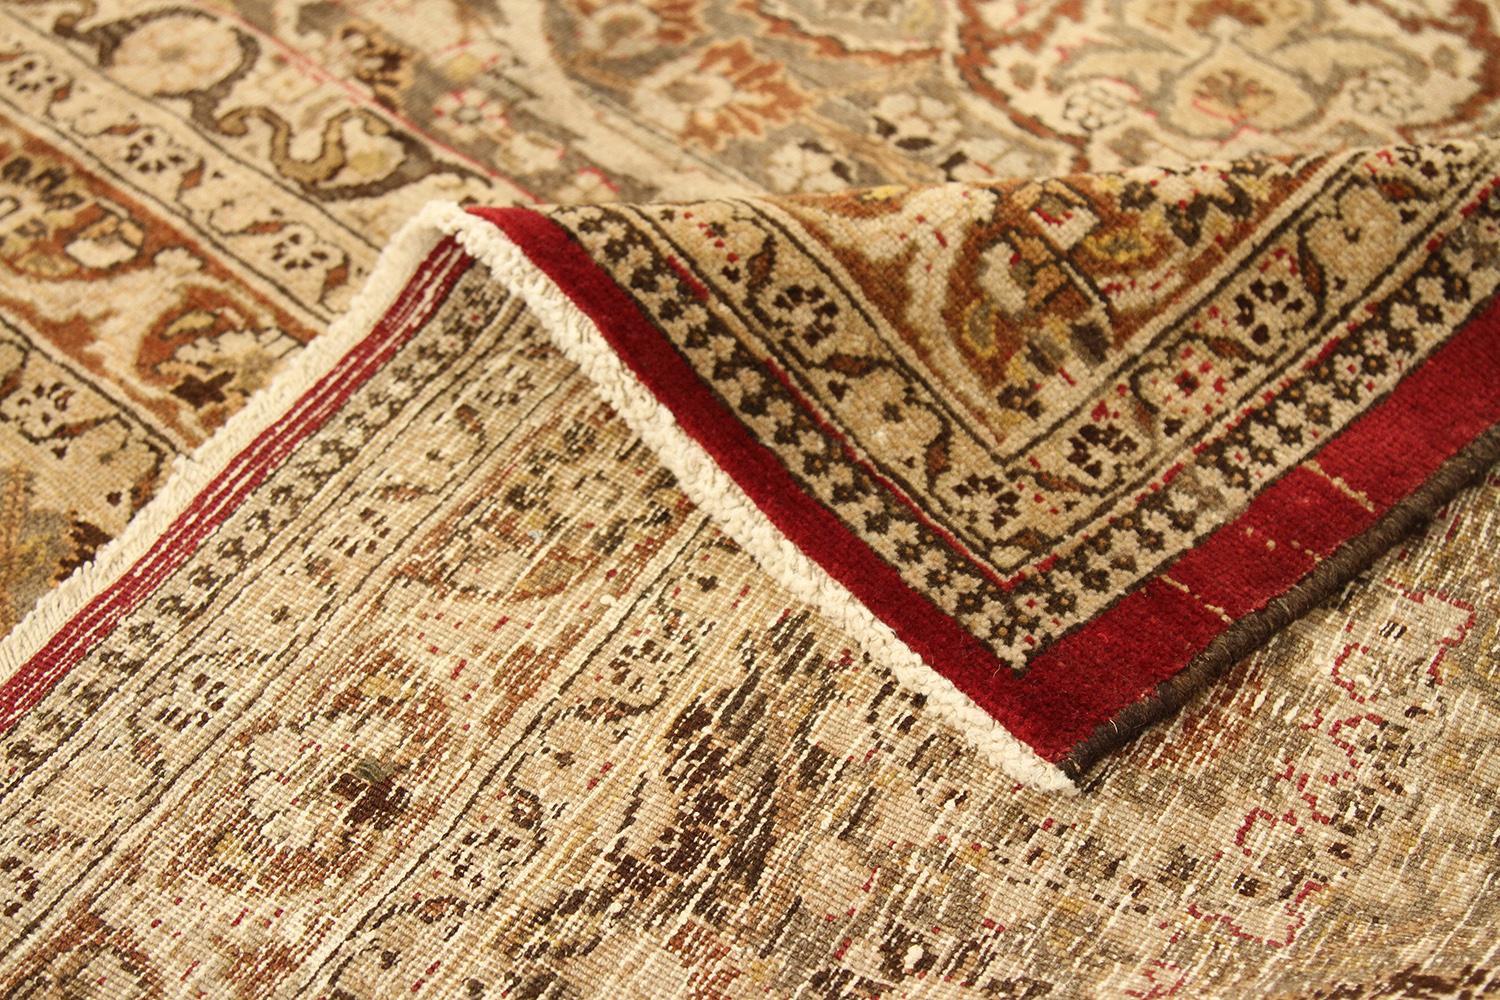 Hand-Woven Large Antique Persian Mashad Rug with Beige and Brown Florals Over Red Field For Sale